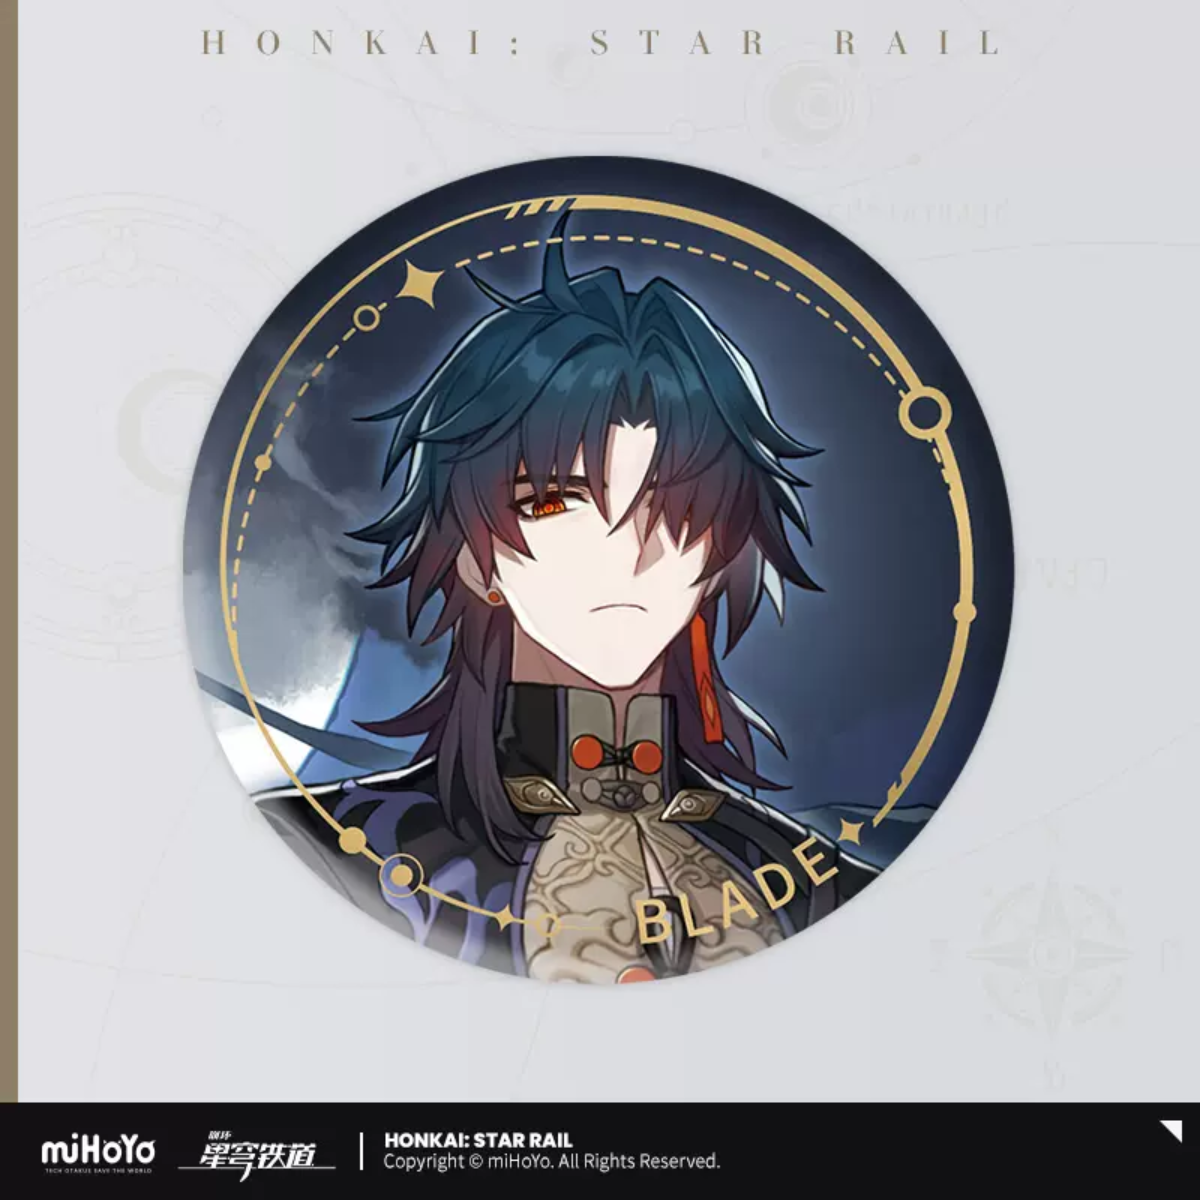 Honkai: Star Rail Character Badge &quot;The Destruction&quot;-Blade-miHoYo-Ace Cards &amp; Collectibles